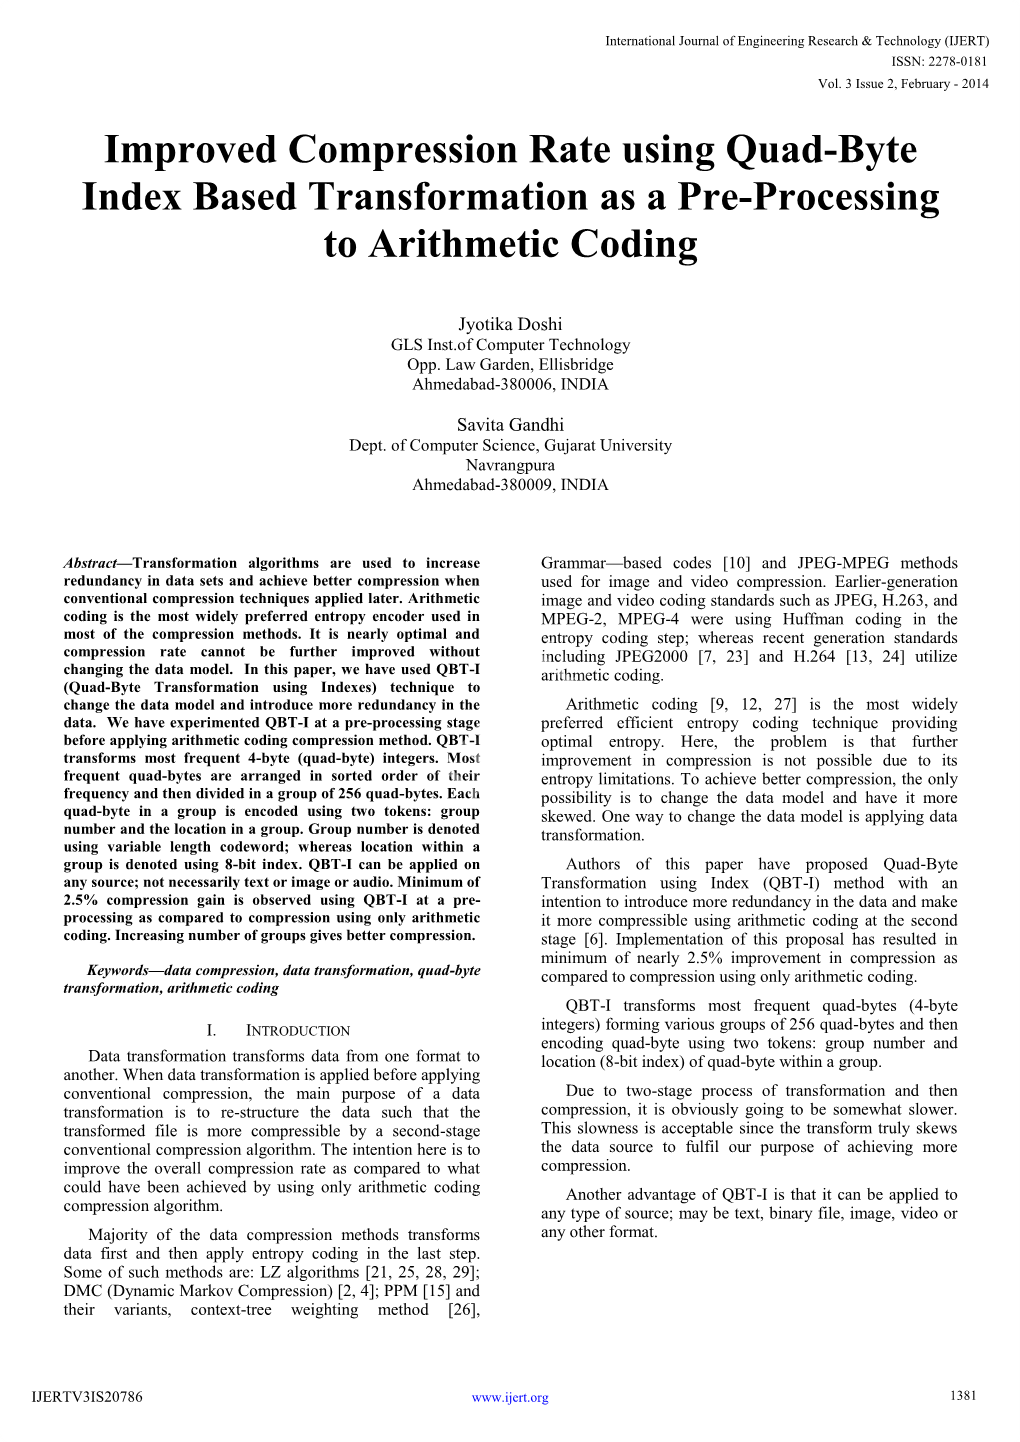 Improved Compression Rate Using Quad-Byte Index Based Transformation As a Pre-Processing to Arithmetic Coding